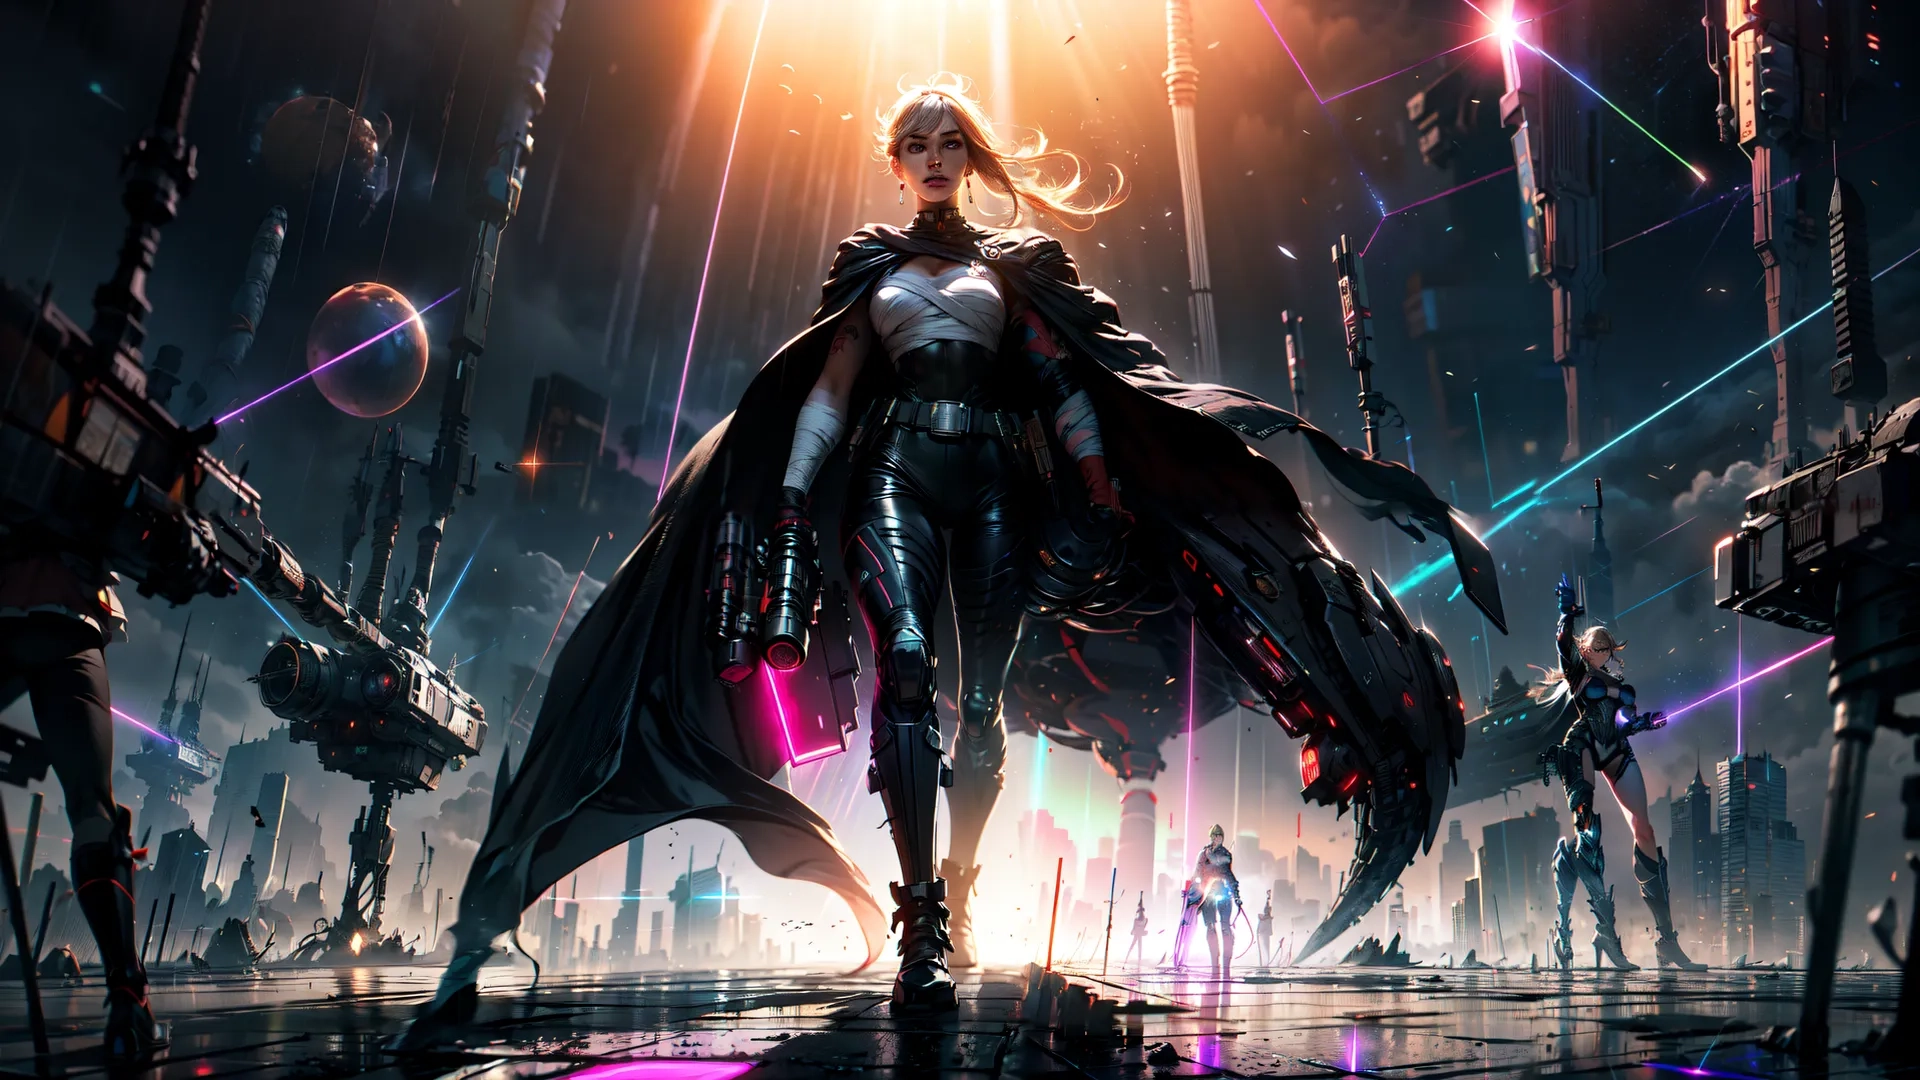 cyber fantasy art of women in black and white clothes, surrounded by futuristic figures and a bright shining star bursting over them's night
